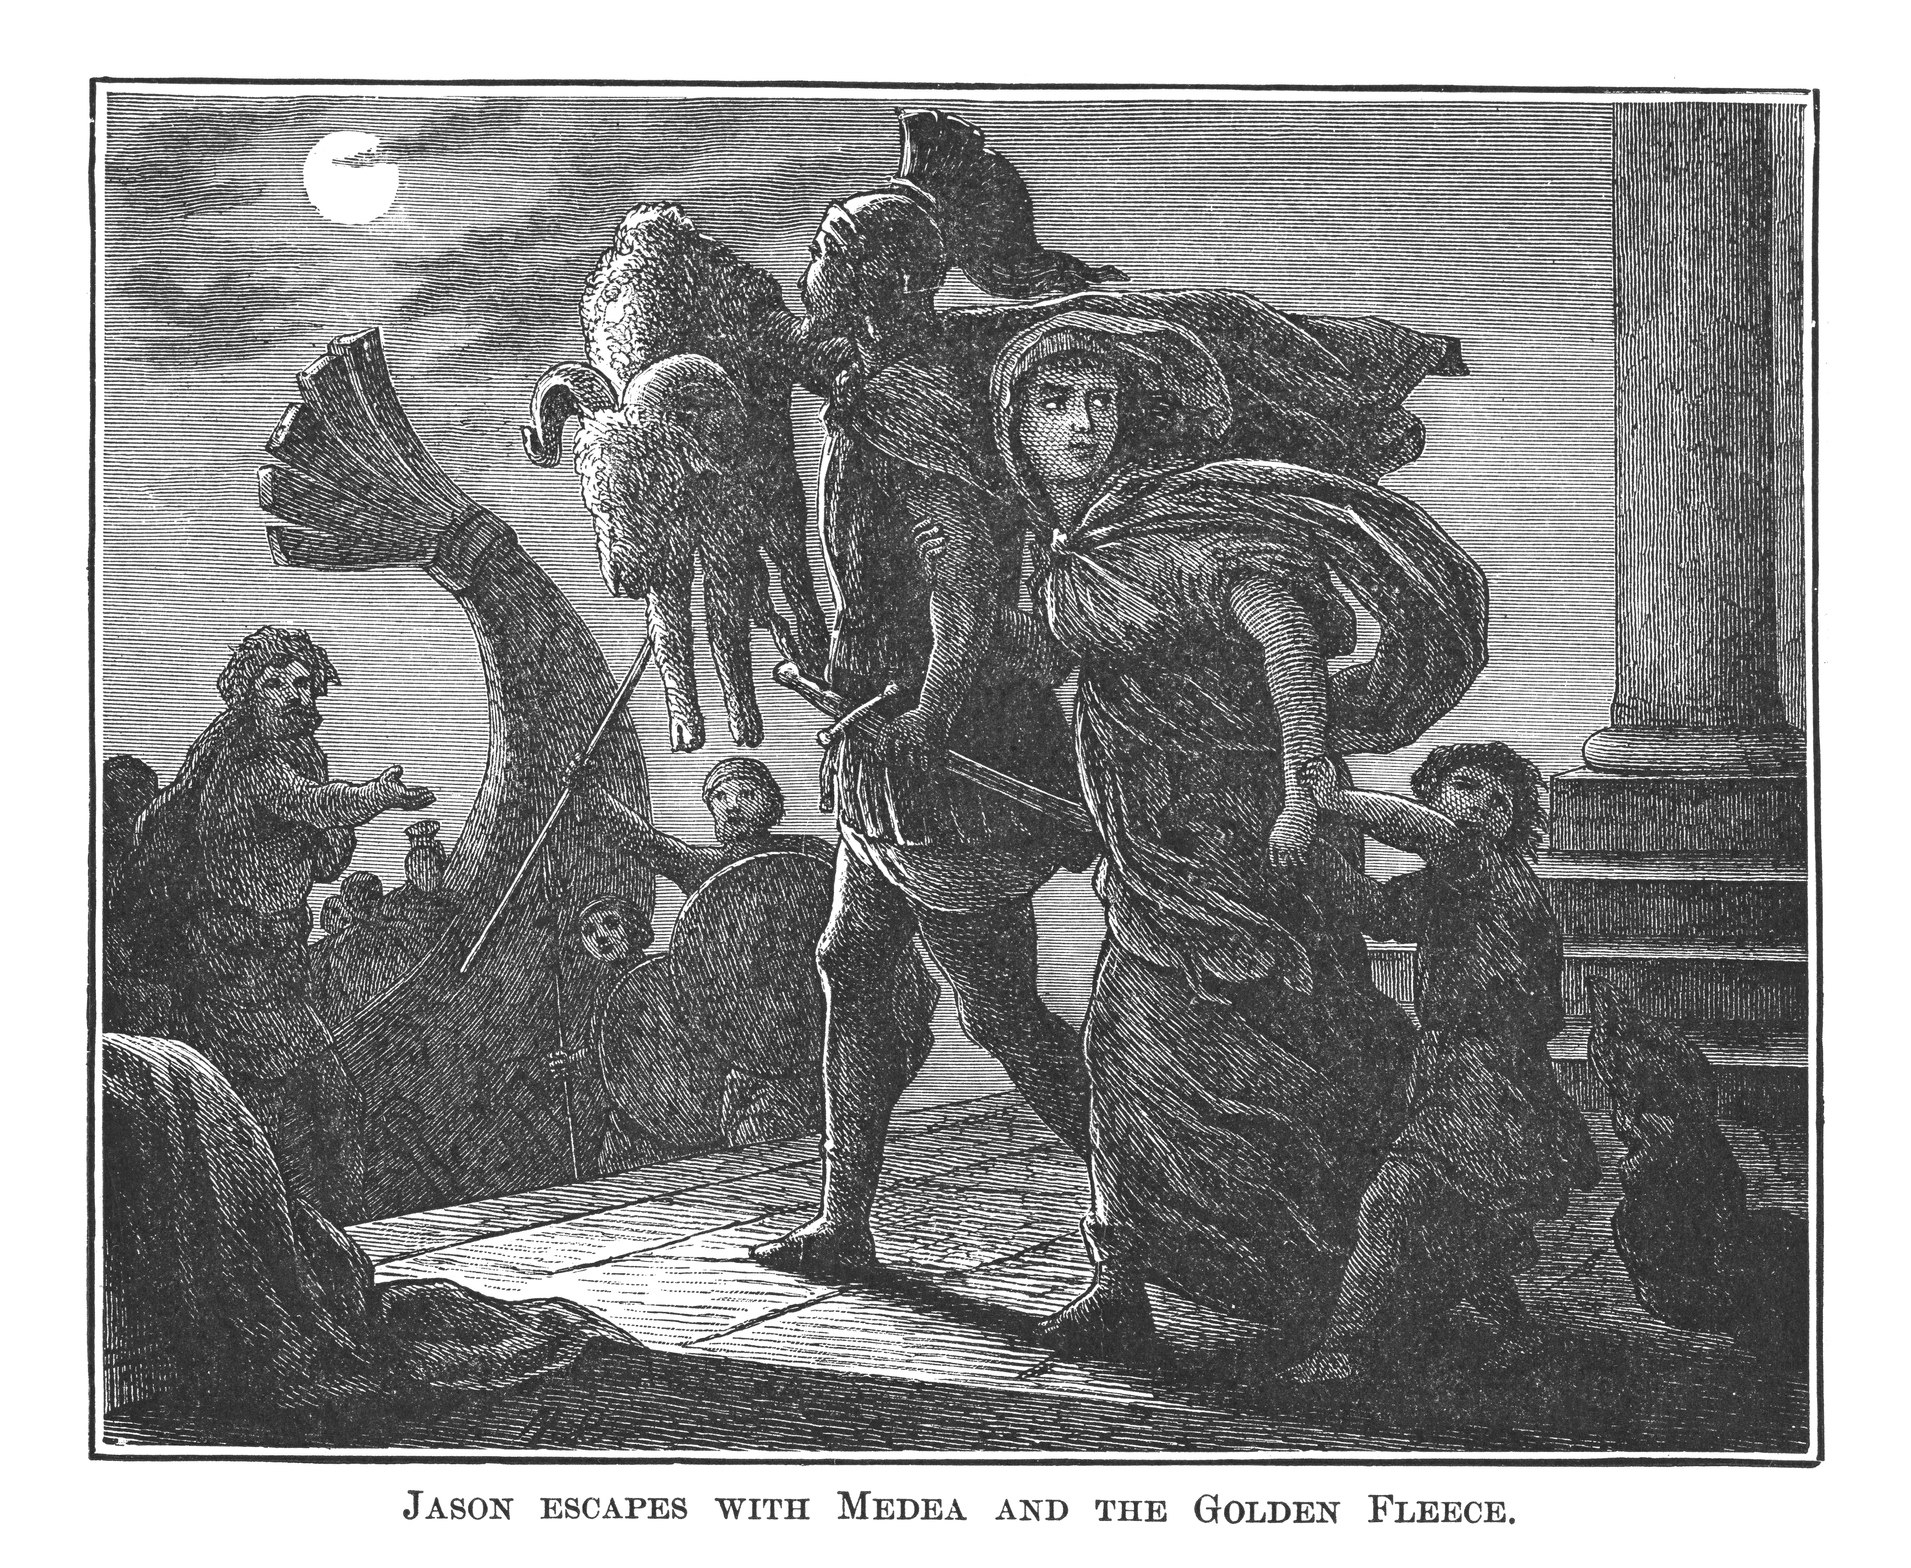 Old engraved illustration of Jason walking towards his ship holding up the Golden Fleece with Medea in tow, captioned &#x27;Jason escapes with Medea and the Golden Fleece&#x27;